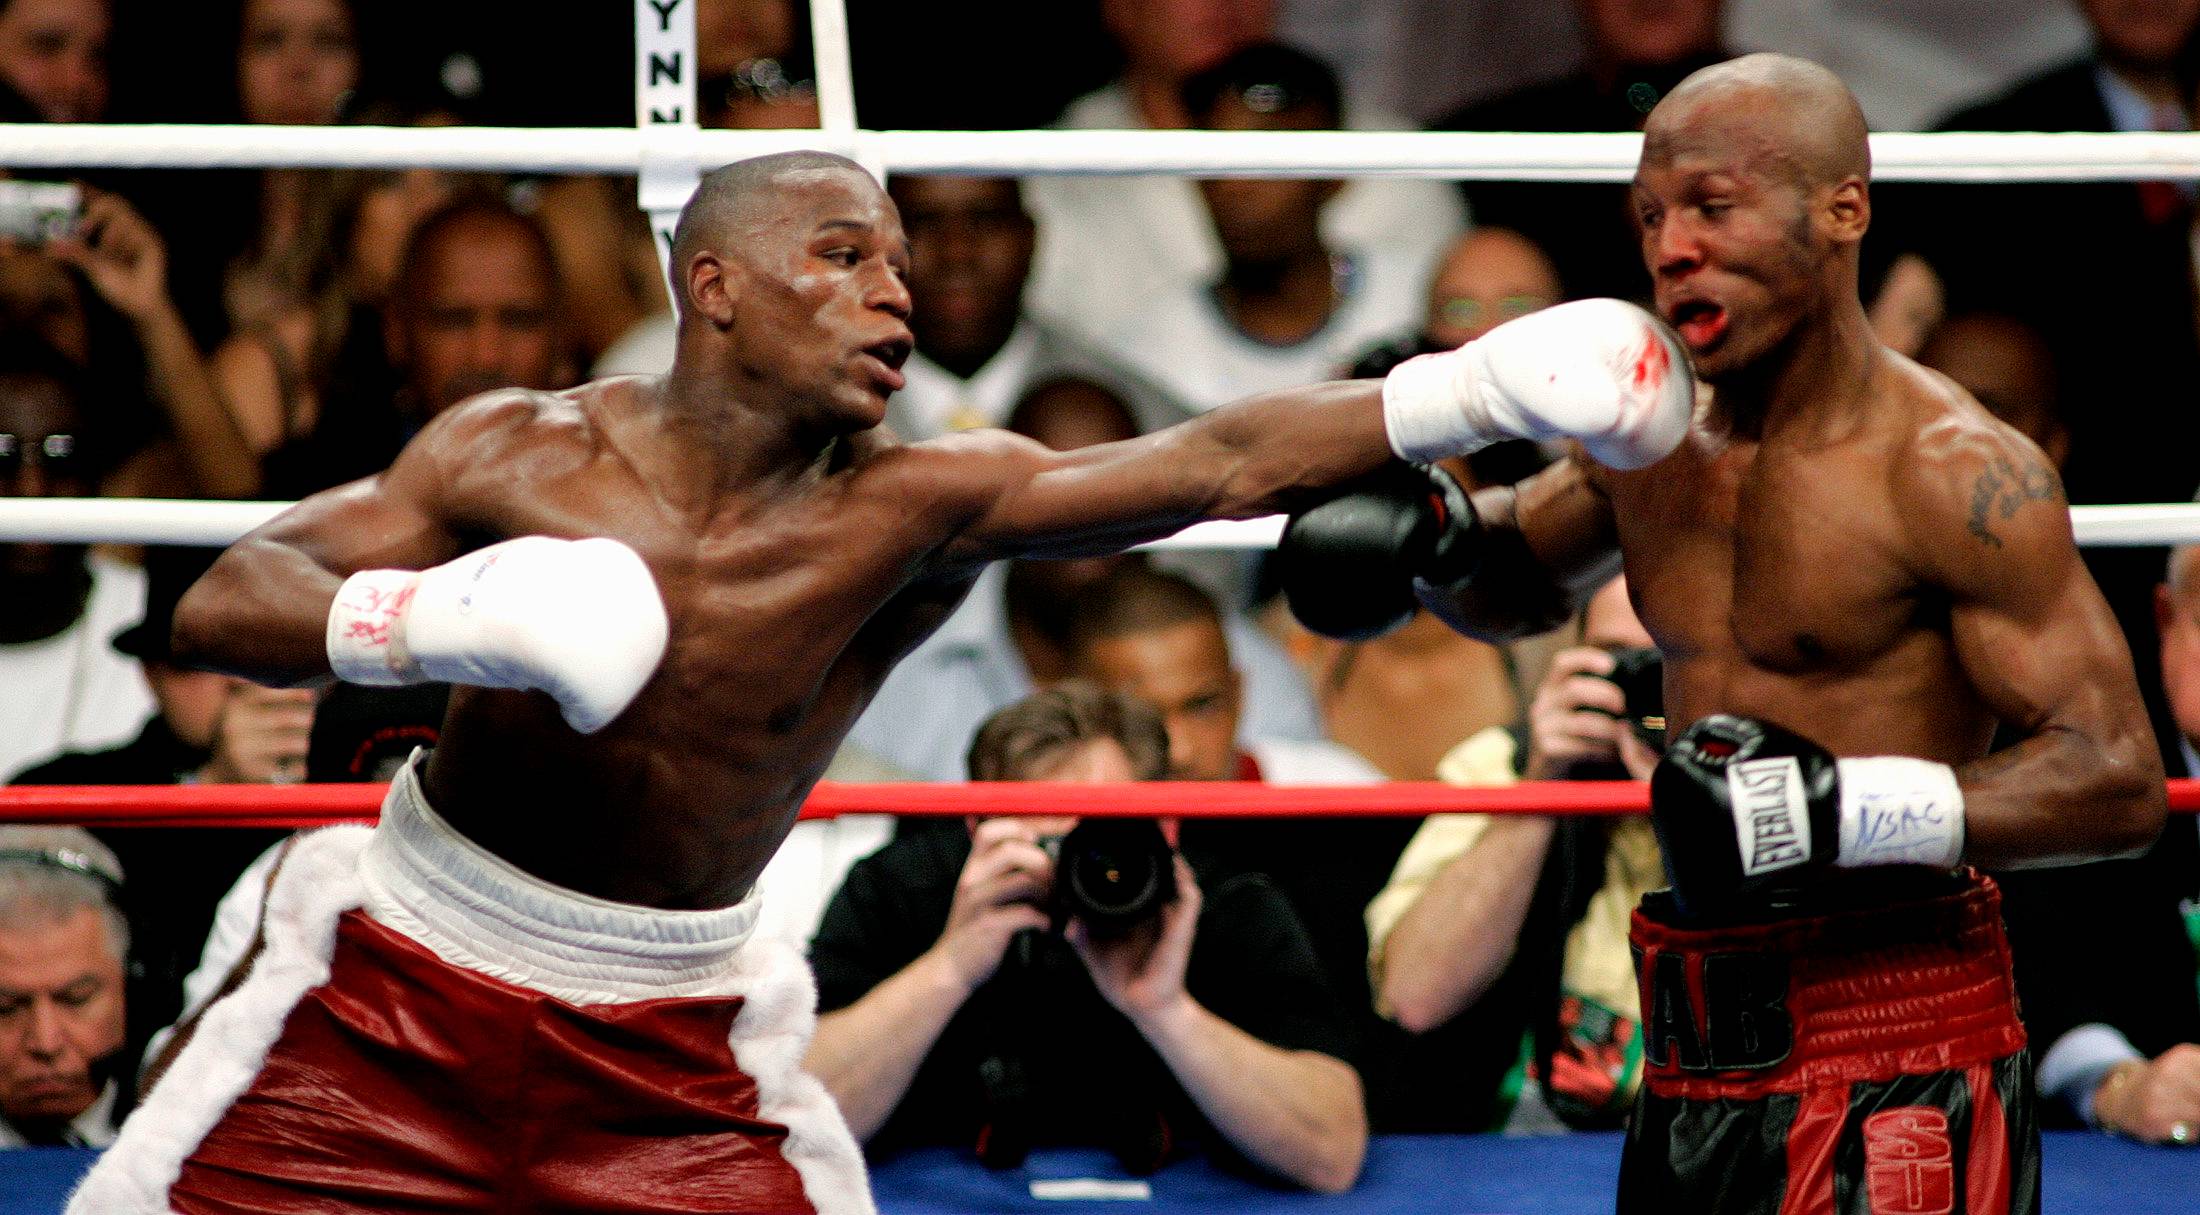 Floyd Mayweather was on the receiving end of a low blow from Zab Judah